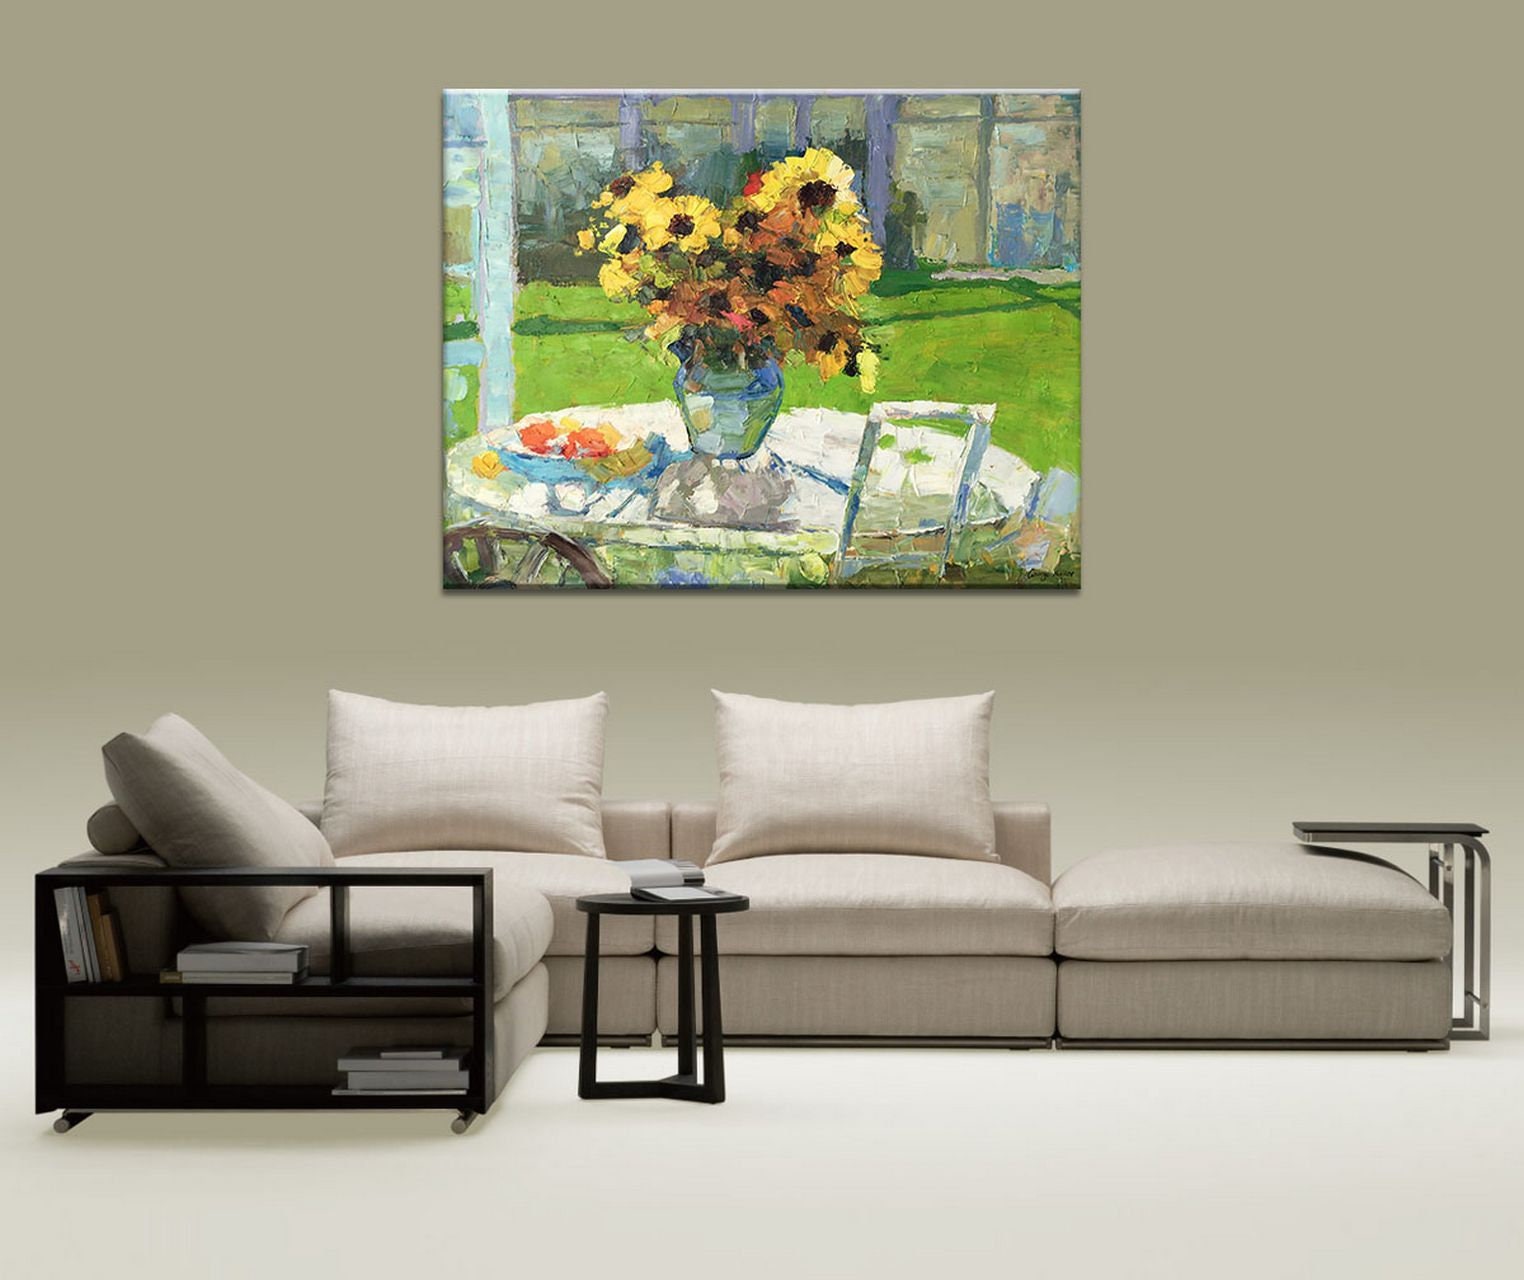 Flower Painting, Sunflowers Oil Painting, Original Art, Modern Art, Palette Knife Painting, Oil Painting, Abstract Flower Painting